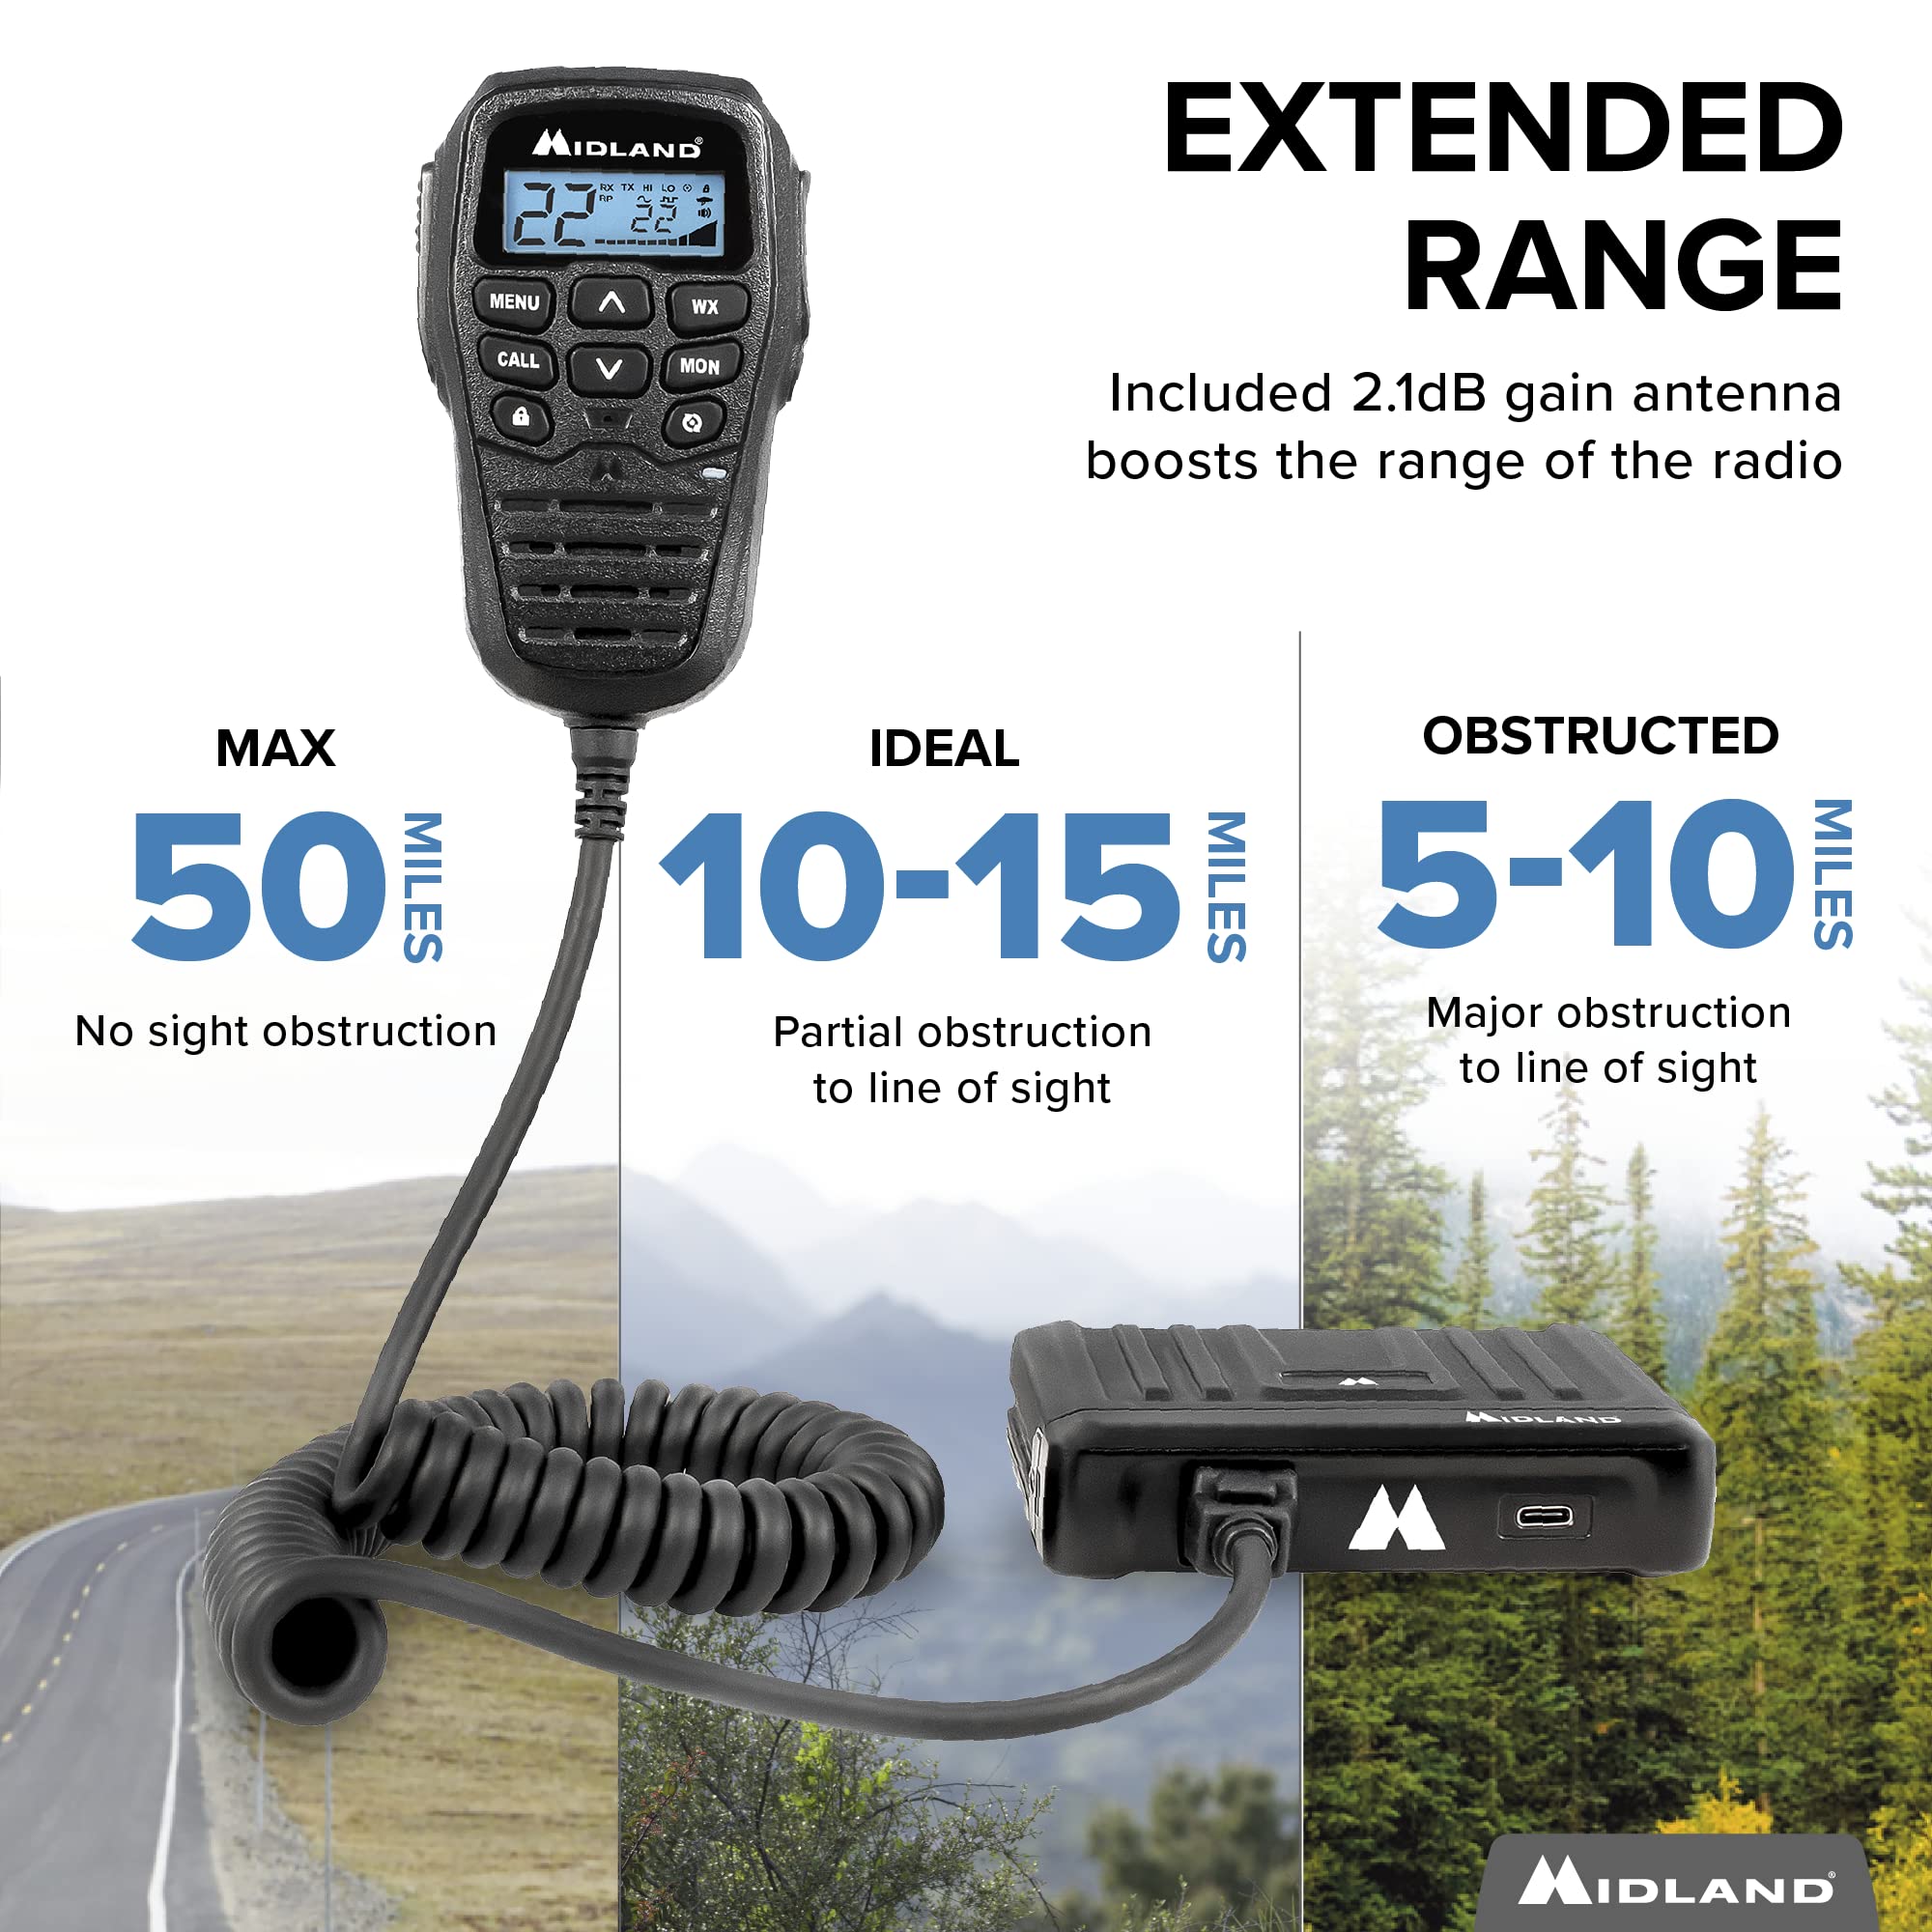 Midland – MXT275 MicroMobile GMRS Radio – 15 watts Two-Way Radio with Integrated Control Microphone – Overland Caravanning Tractors – Detachable External Magnetic Mount Antenna - 8 Repeater Channels